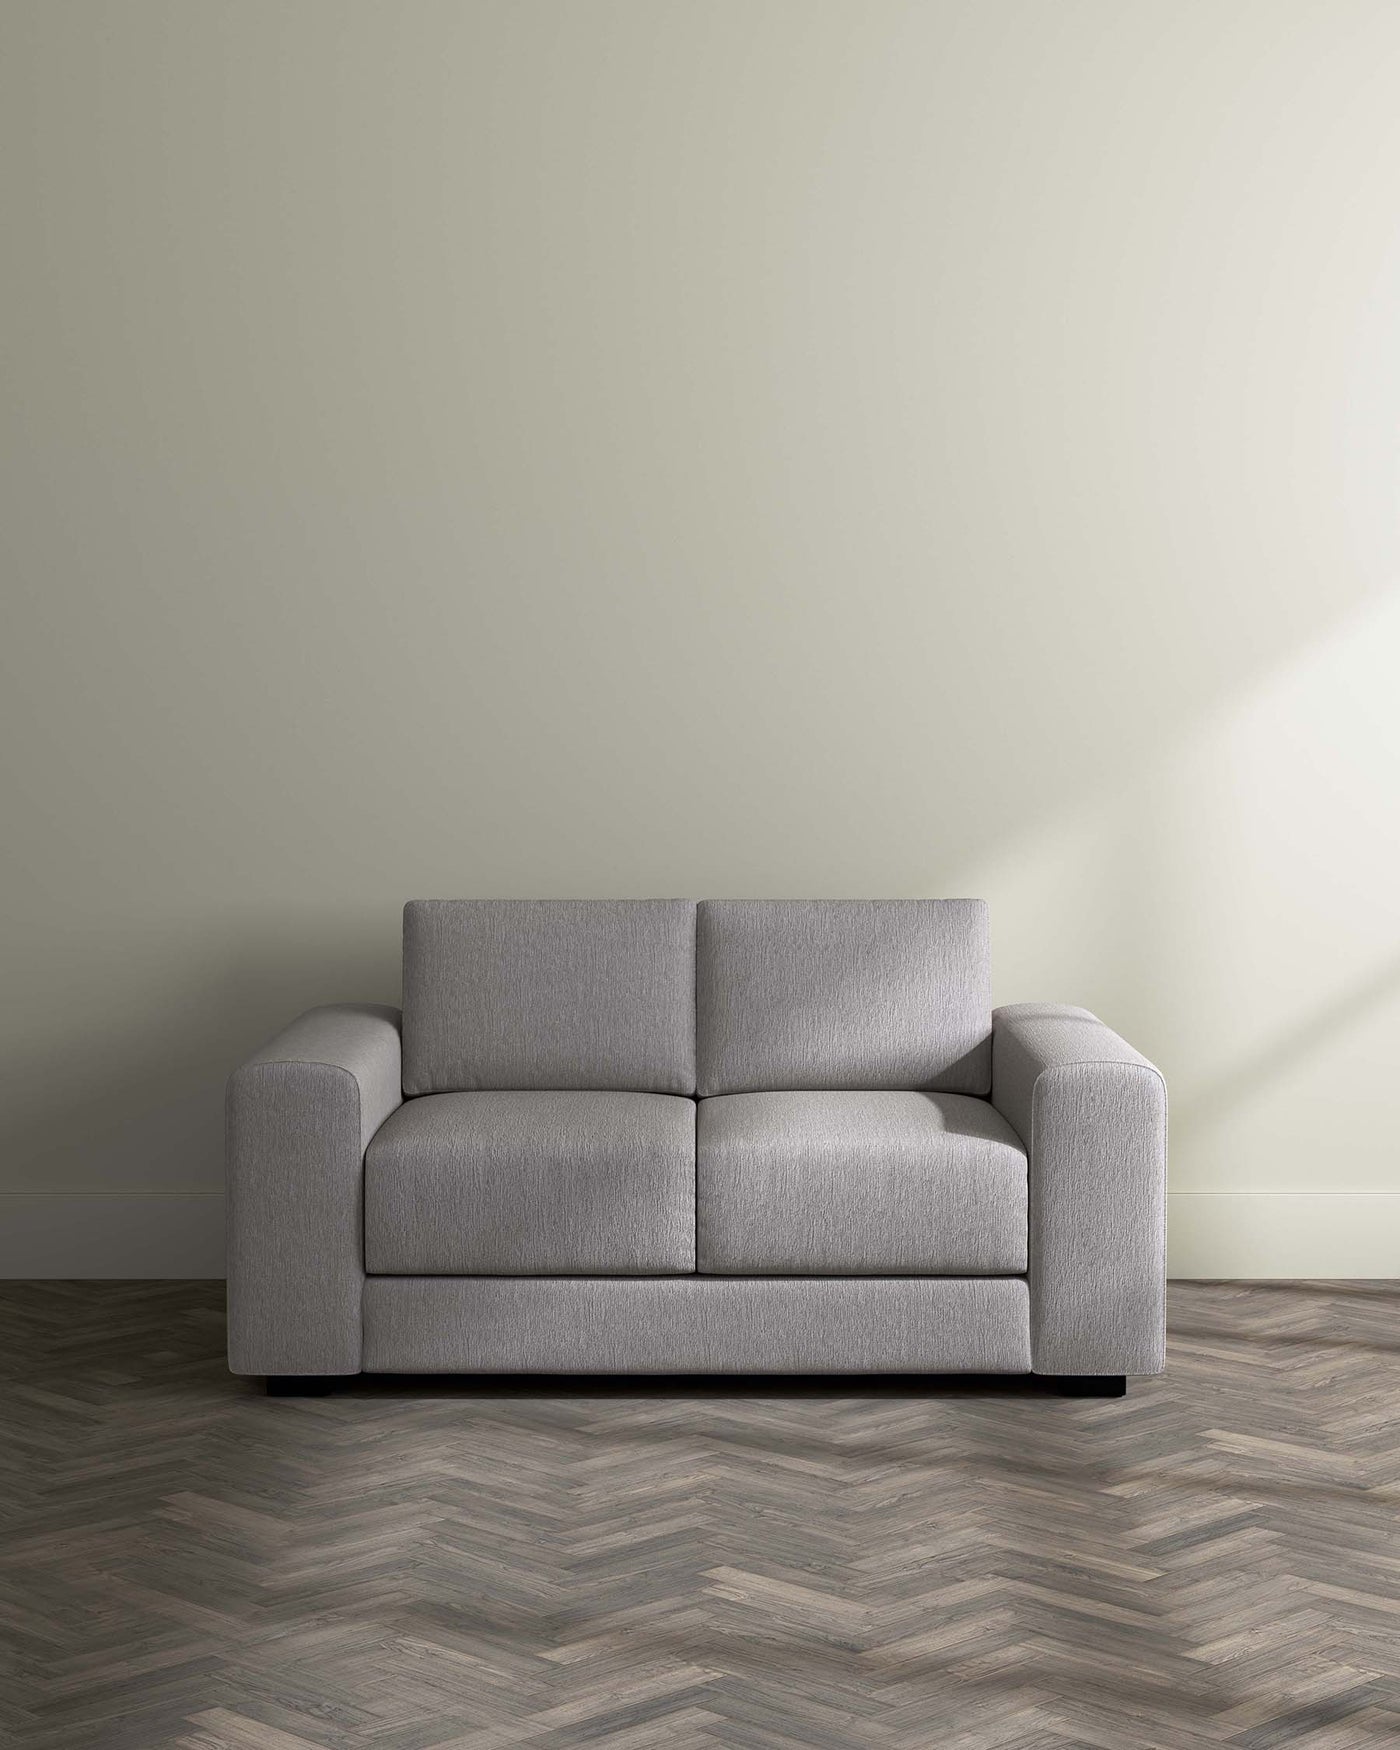 Modern light grey fabric sofa with clean lines and a minimalist design, featuring plush cushioning, wide armrests, and a low-profile silhouette set against a neutral wall on a herringbone-patterned wooden floor.